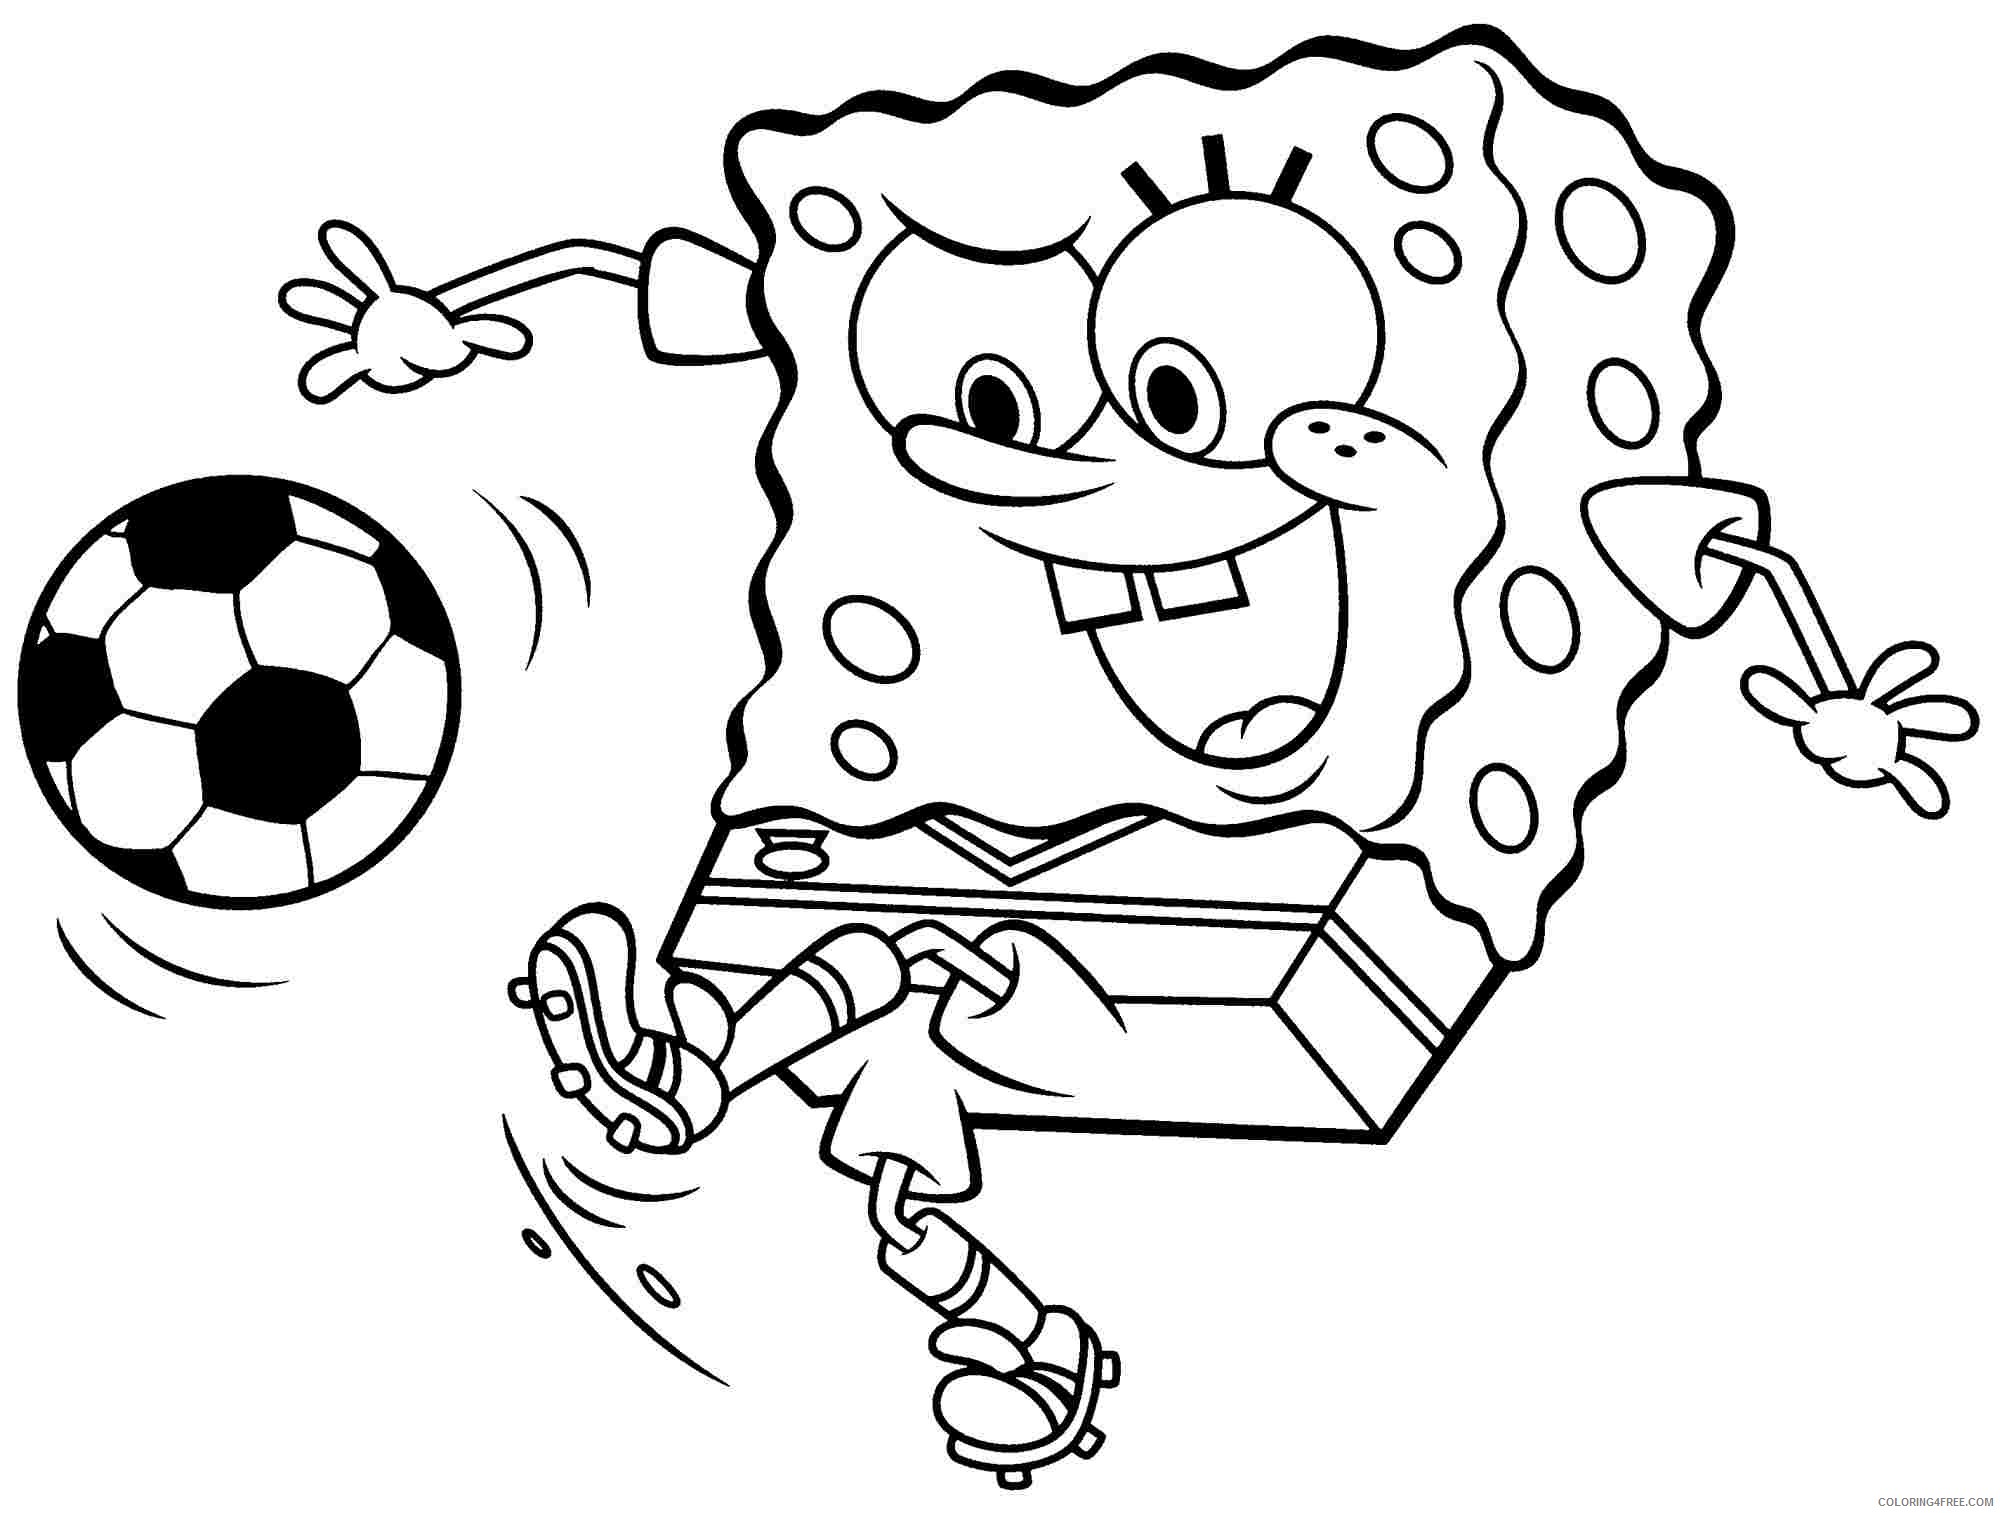 spongebob squarepants coloring pages playing soccer Coloring4free